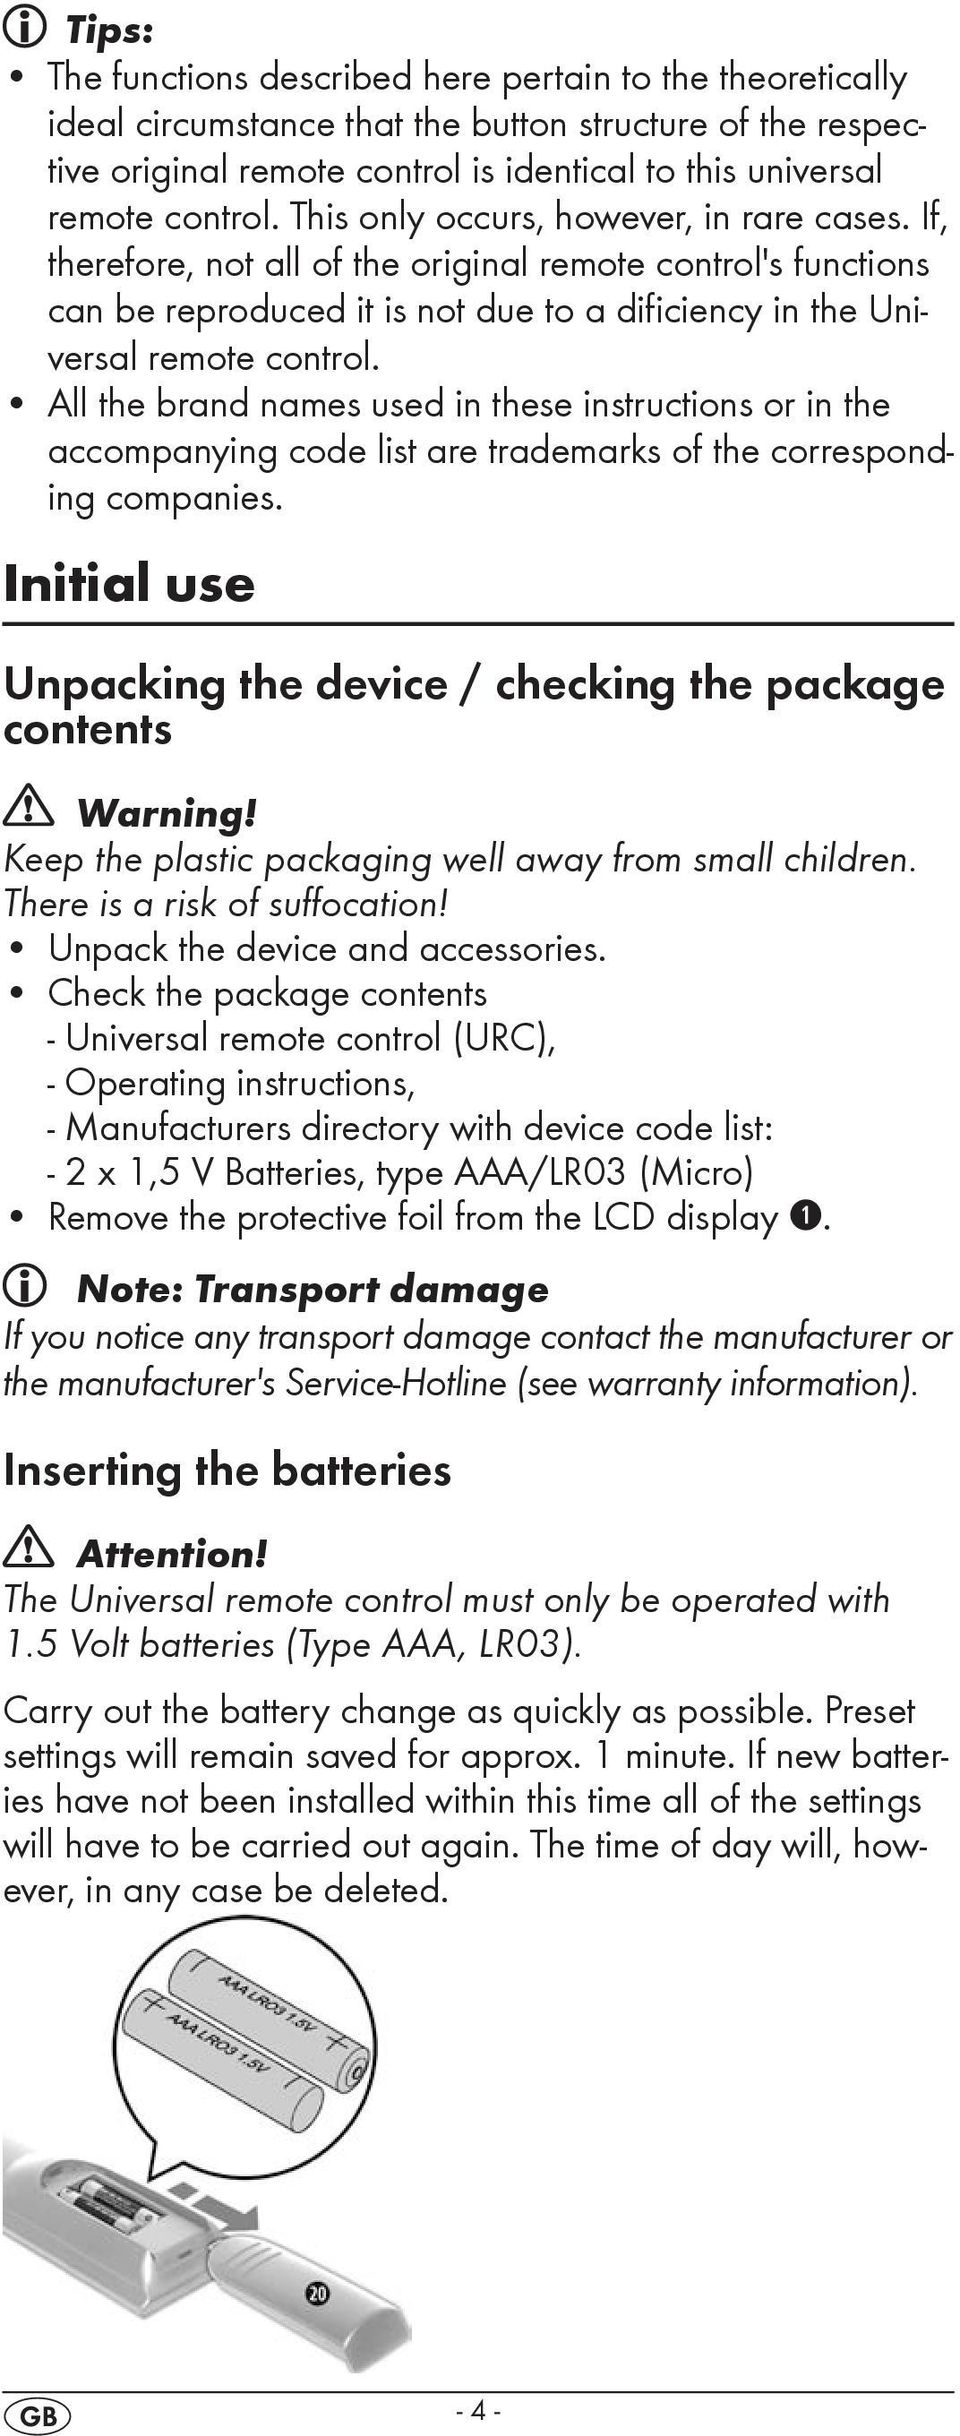 All the brand names used in these instructions or in the accompanying code list are trademarks of the corresponding companies. Initial use Unpacking the device / checking the package contents Warning!